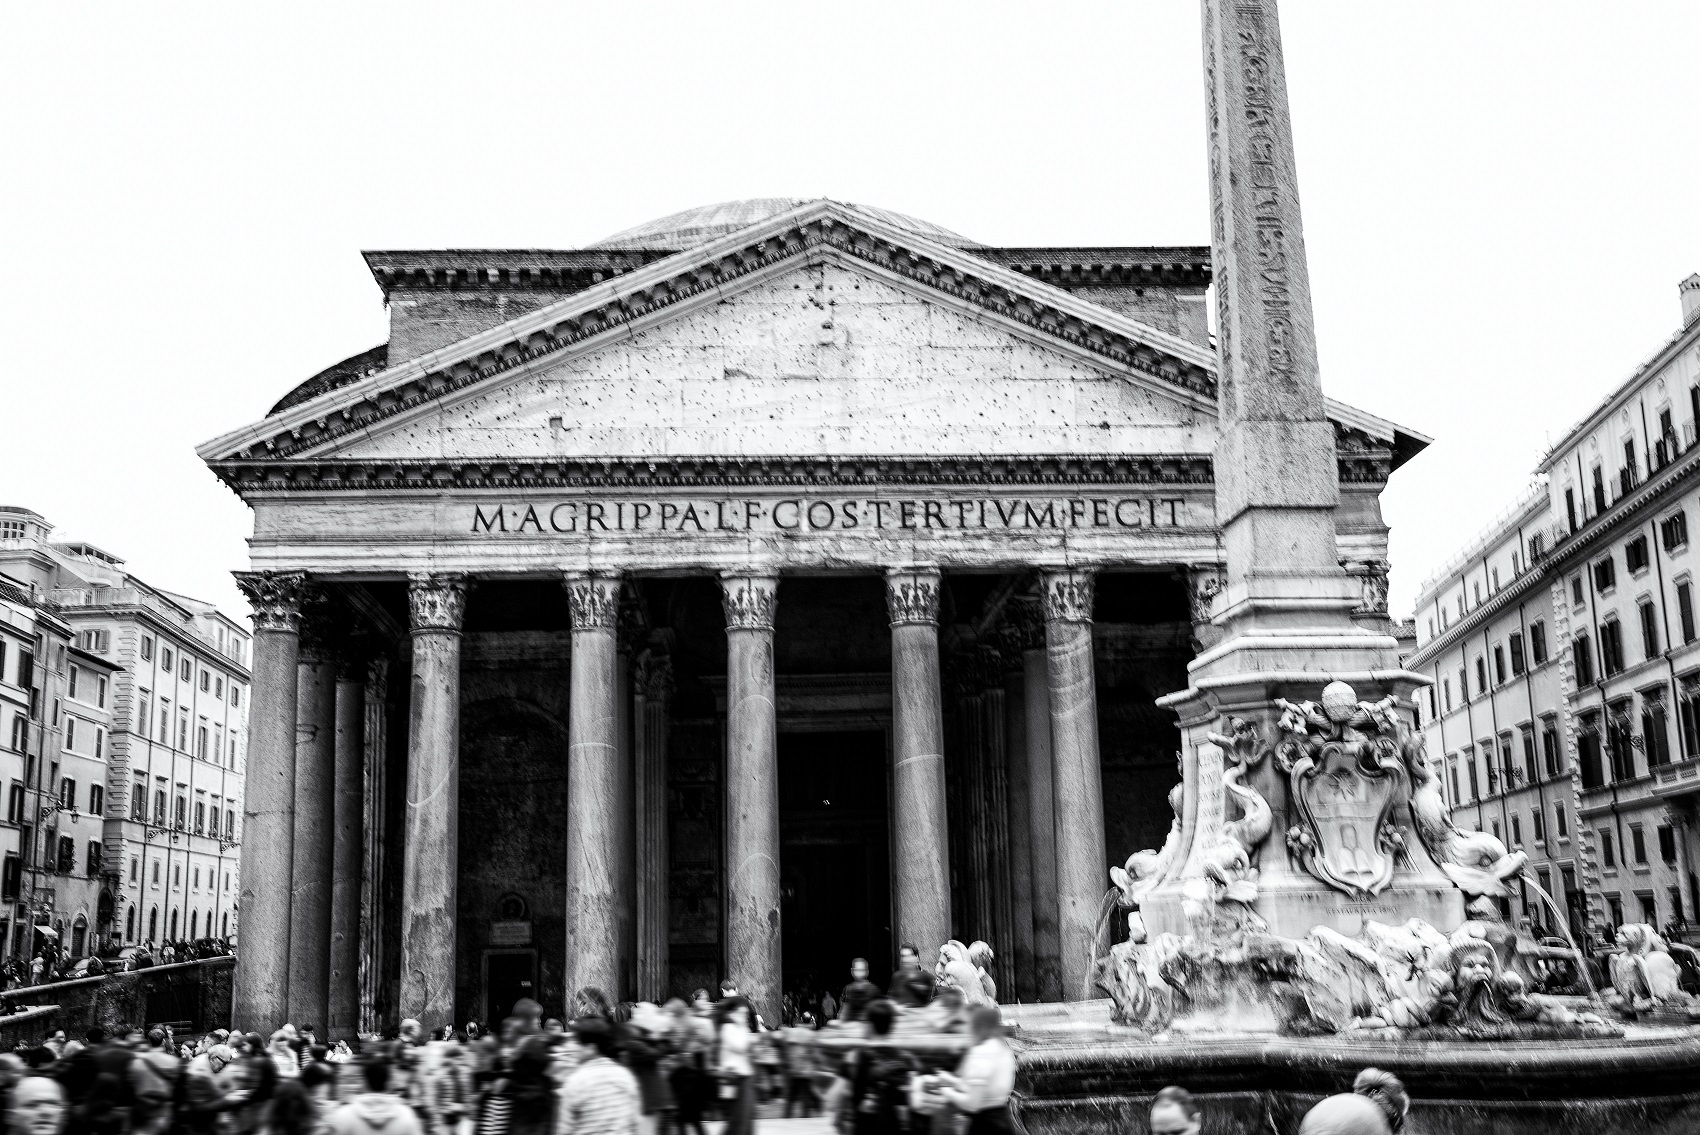 <small>The Pantheon, a former Roman temple that has served as a church since 609 AD.
</small>